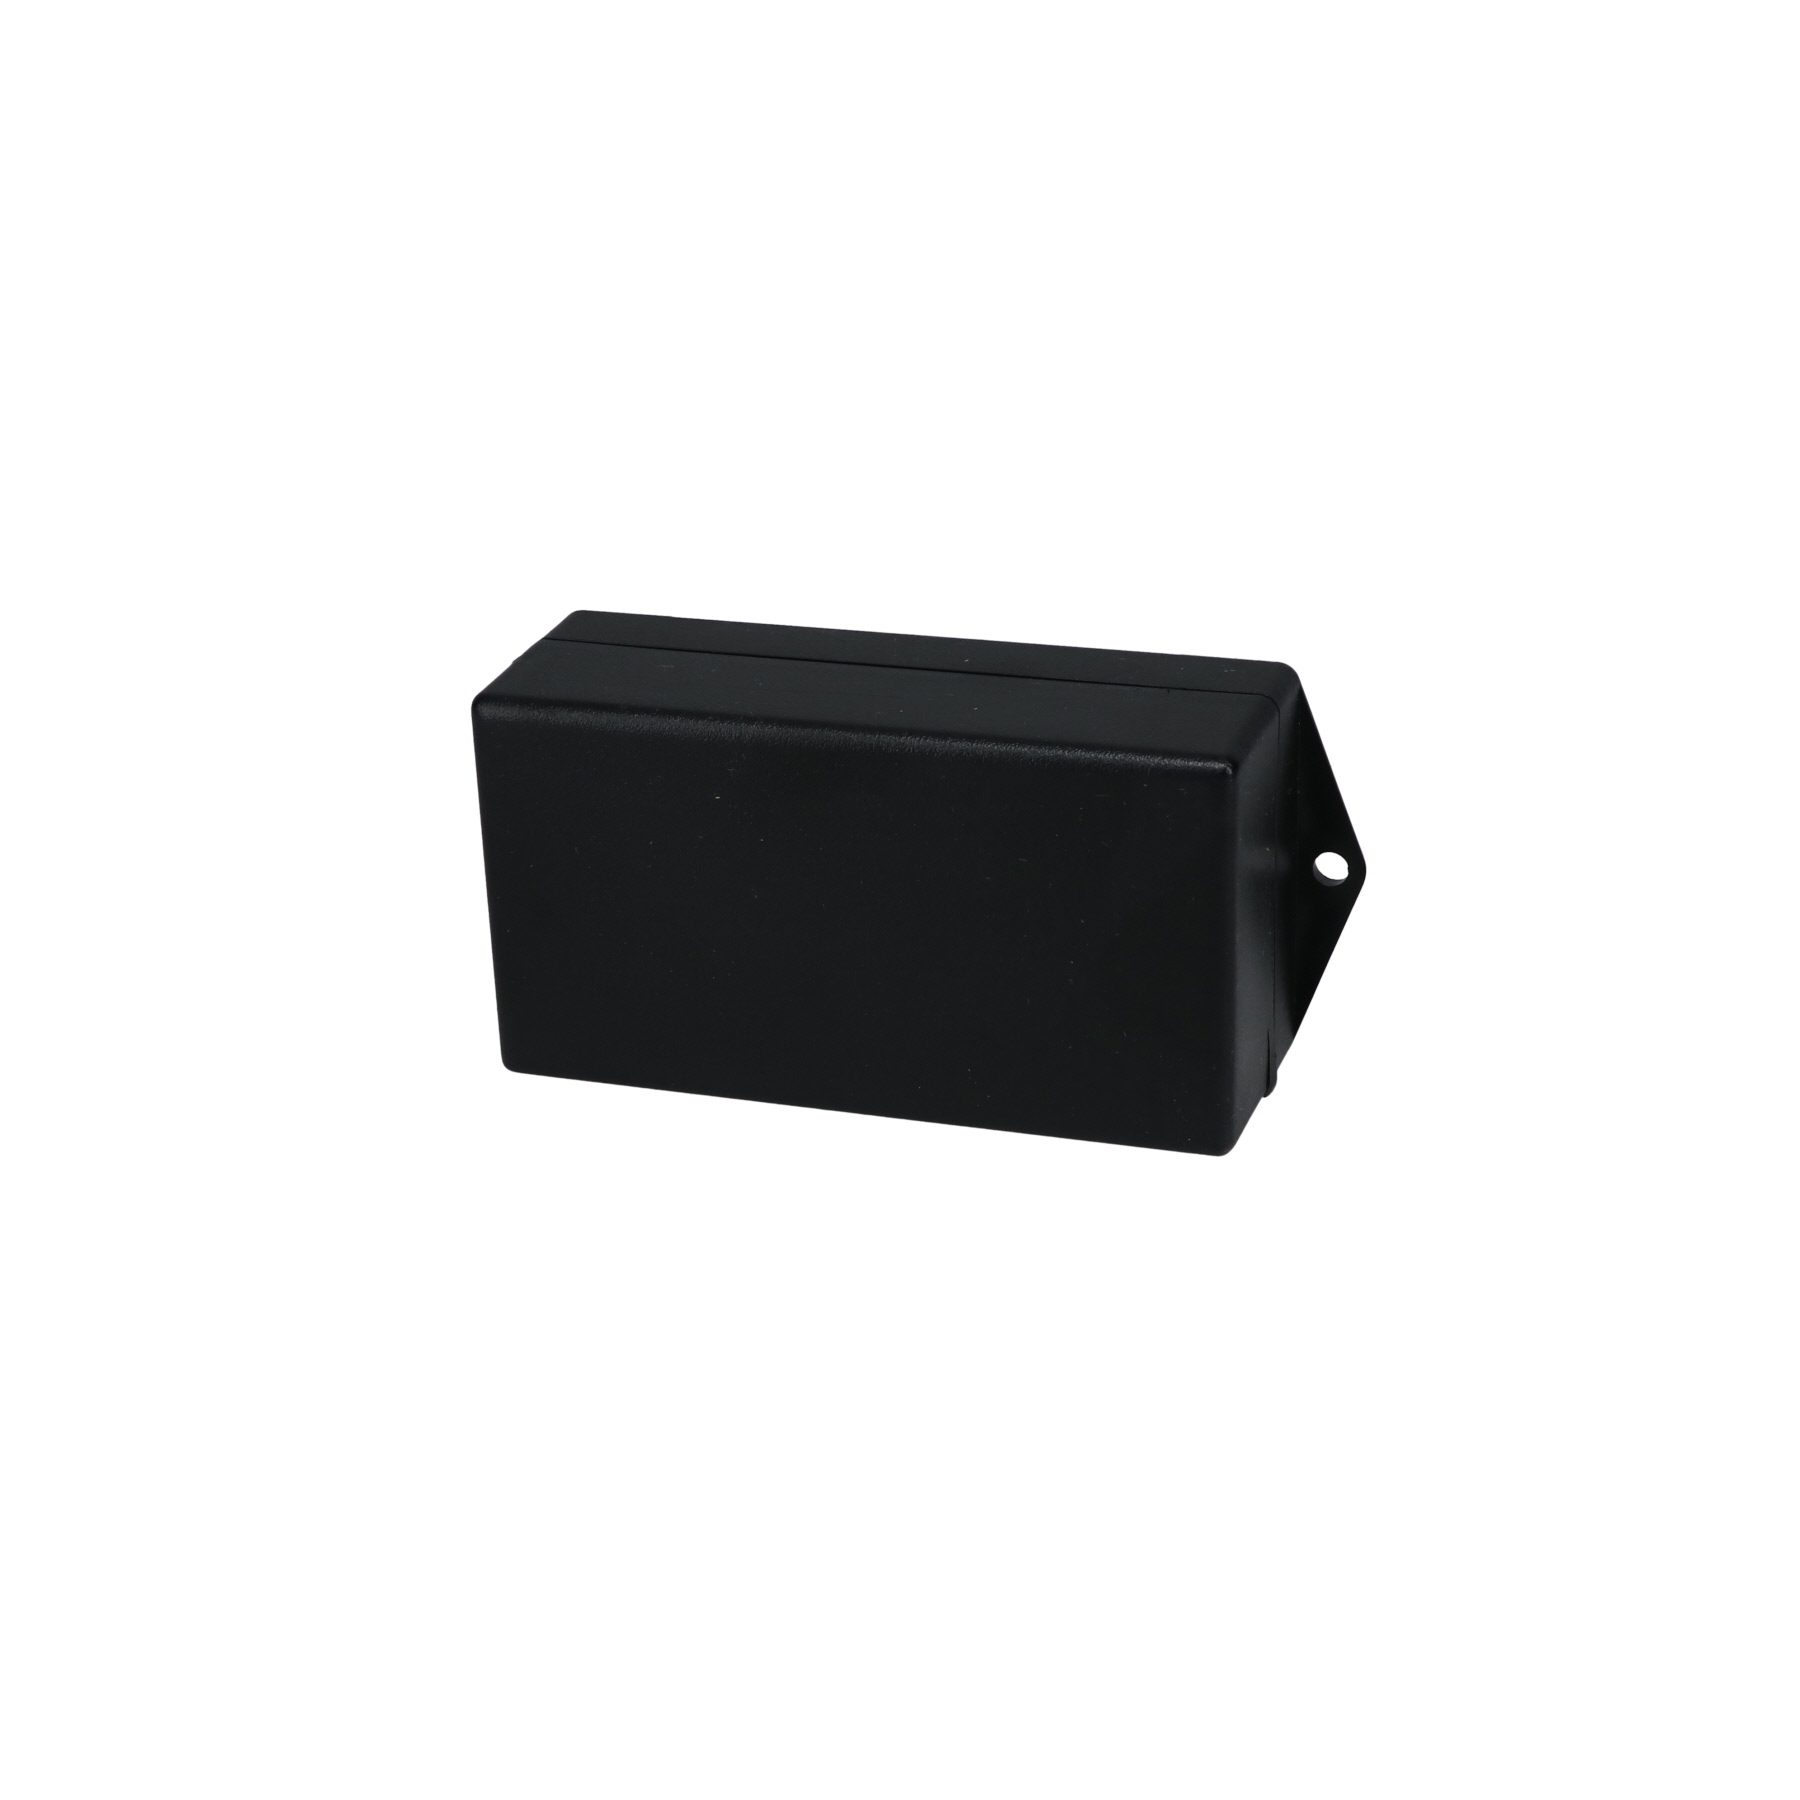 Utilibox Style H Plastic Utility Box with Mounting Flanges CU-1474-MB